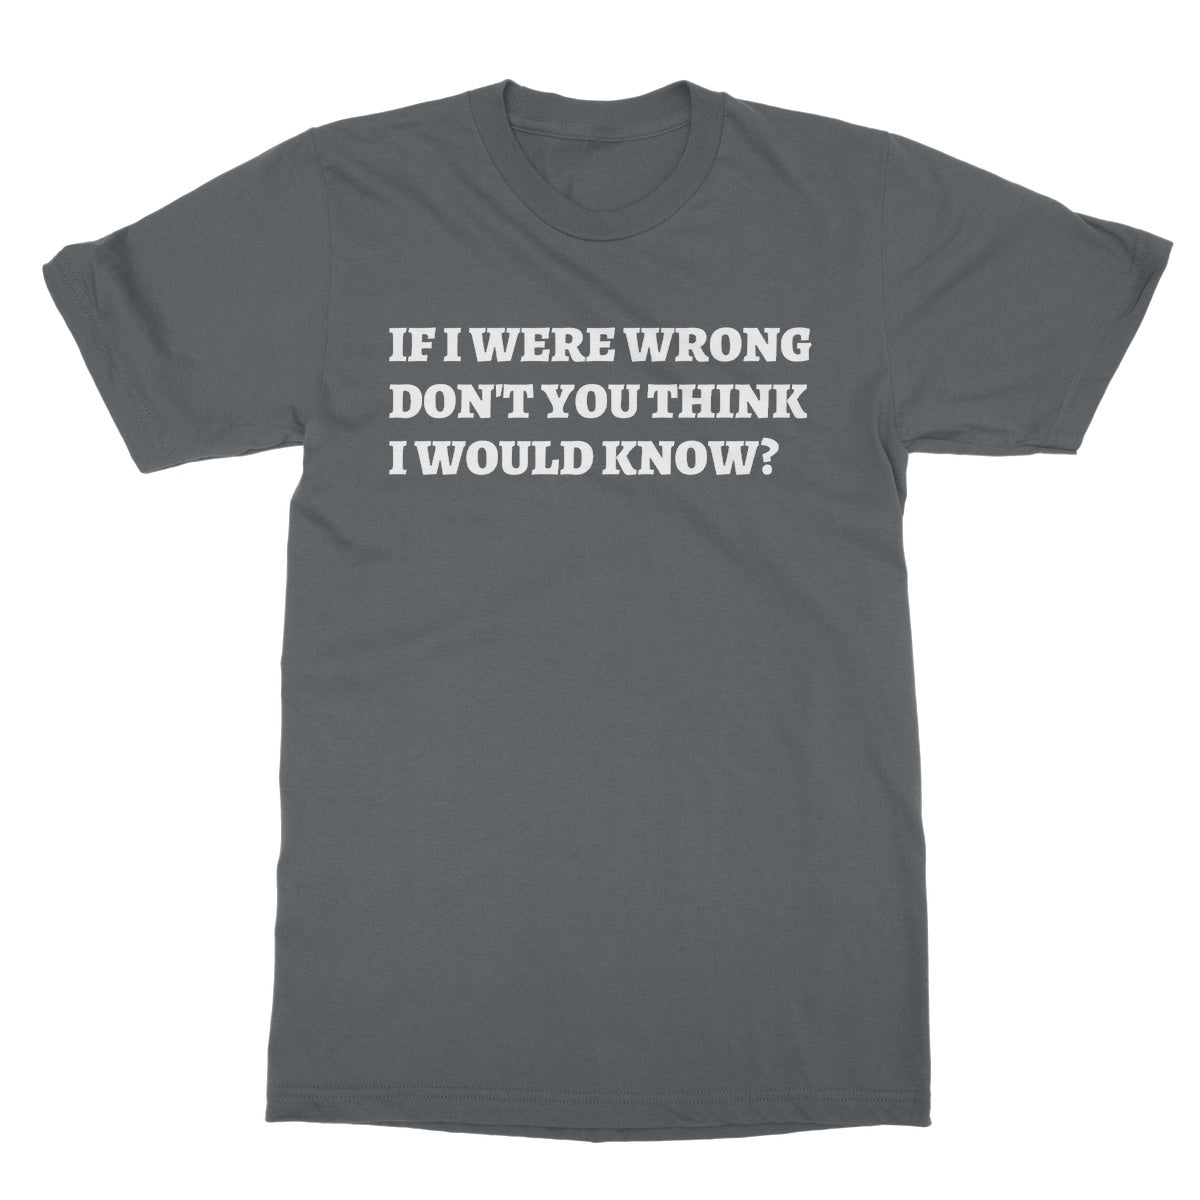 if I were wrong don't you think I would know t shirt grey